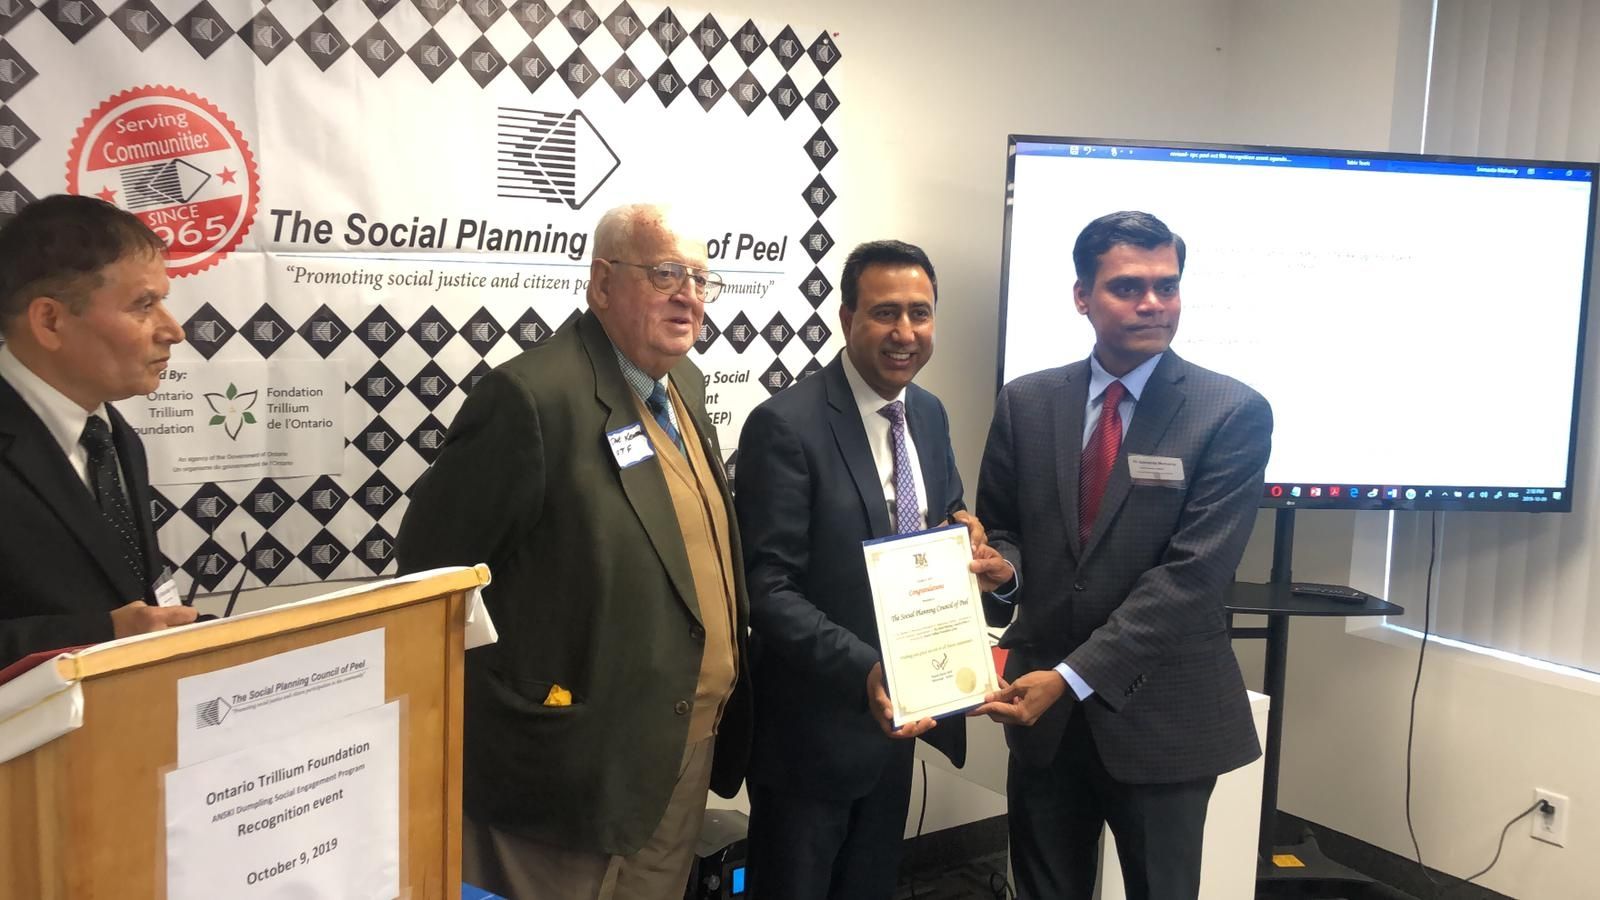 Dr. Srimanta Mohanty accpeting award on behalf of Social Planning Council of Peel